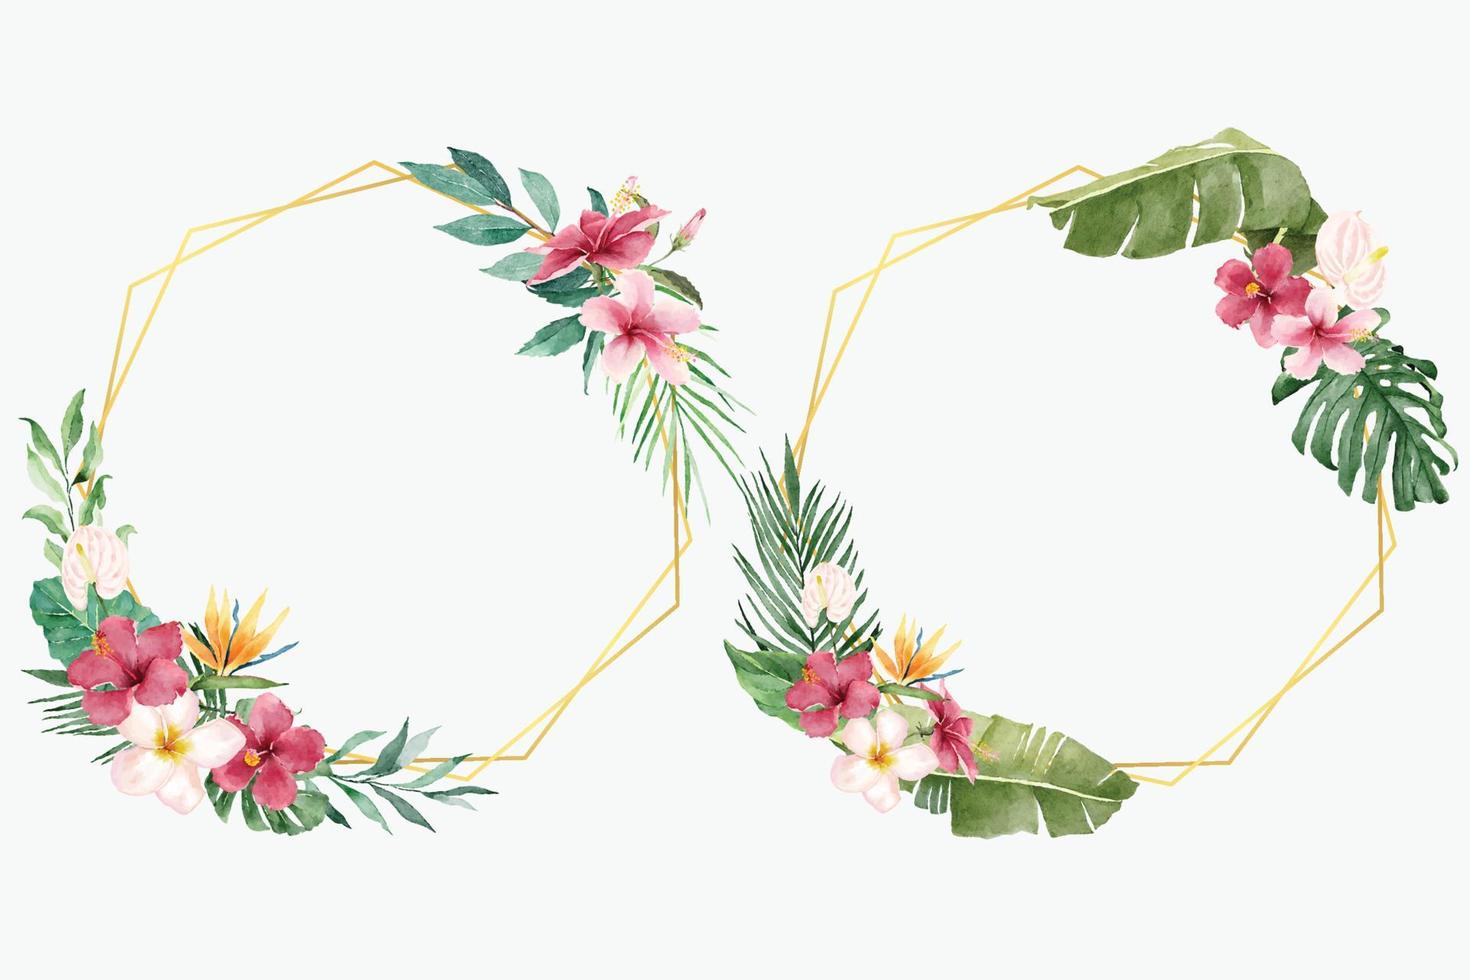 Tropical Flowers with Geometric Golden Frames vector